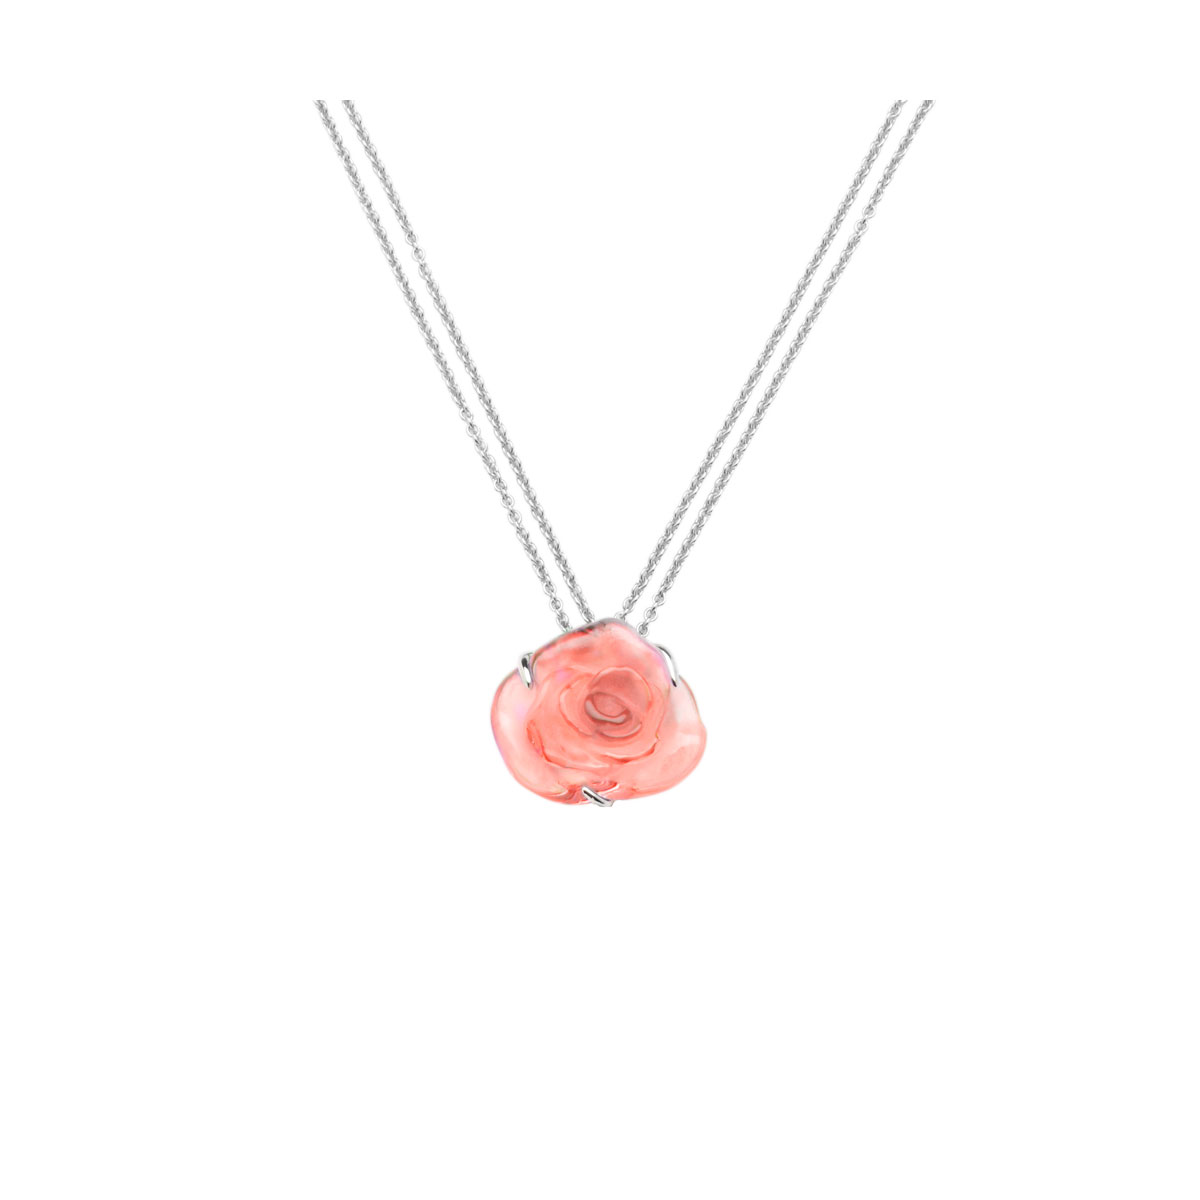 Daum Rose Passion Crystal Necklace in Pink, Silver